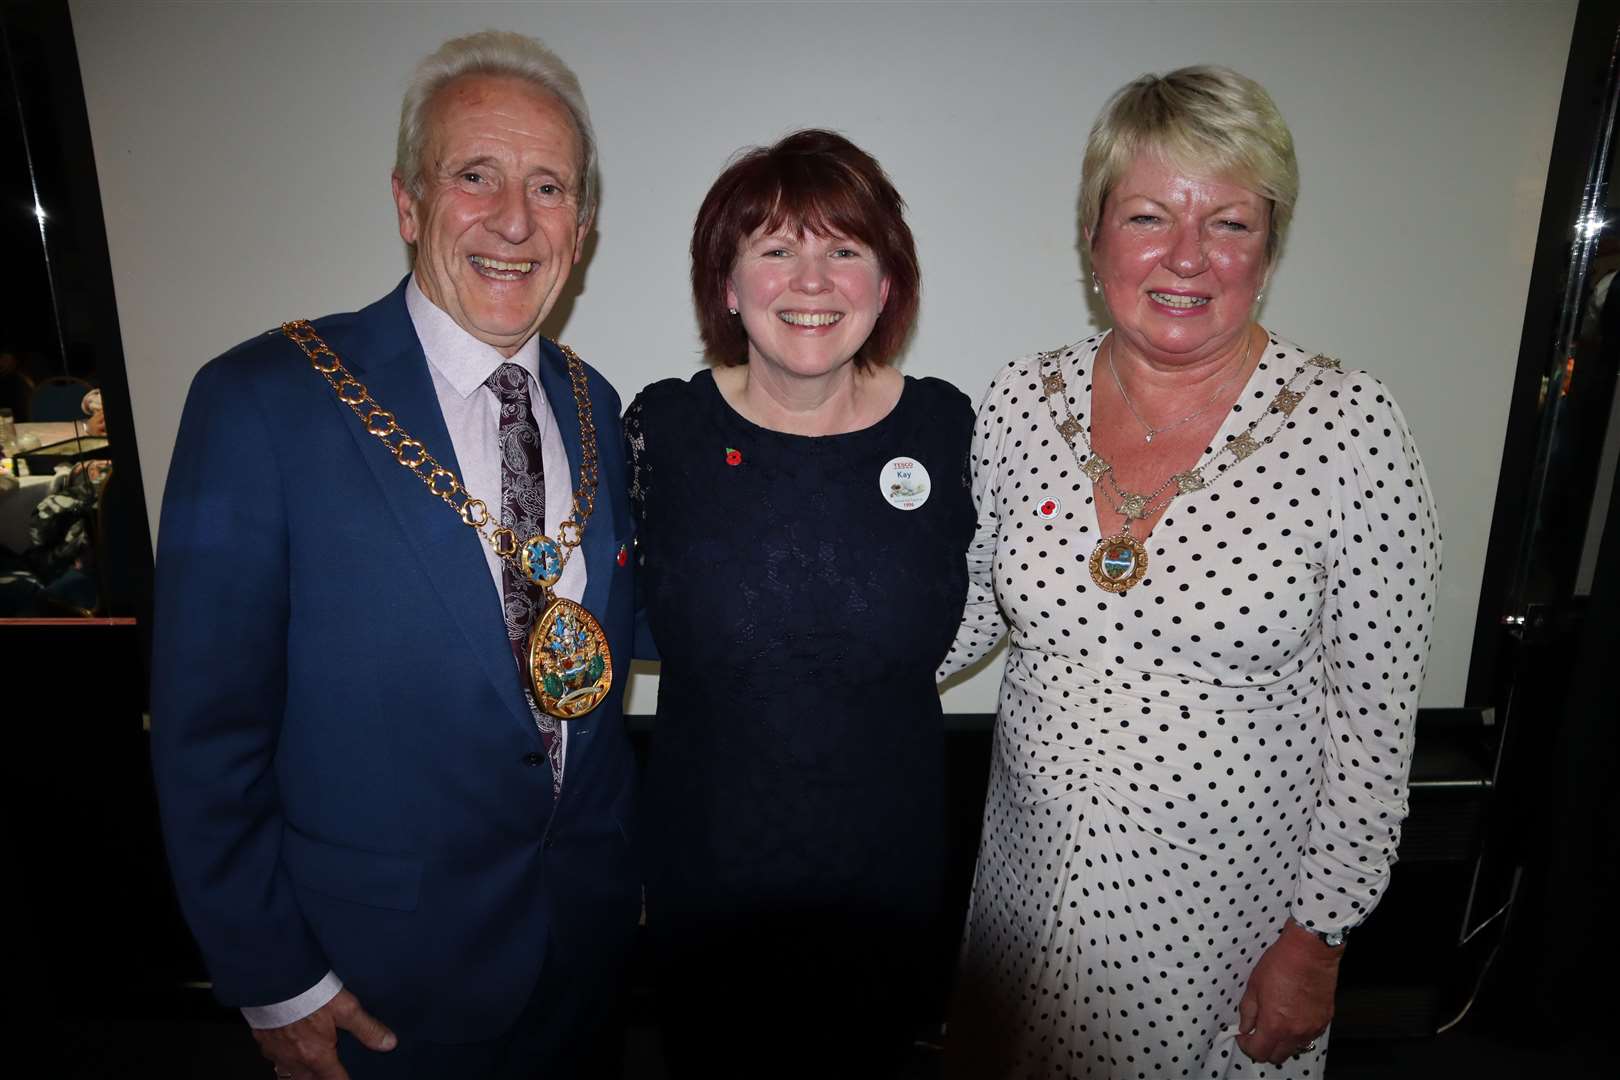 Store manager Kay Speed with Swale's mayor and mayoress Cllrs Paul and Sarah Stephen at the Tesco Pride of the Island awards